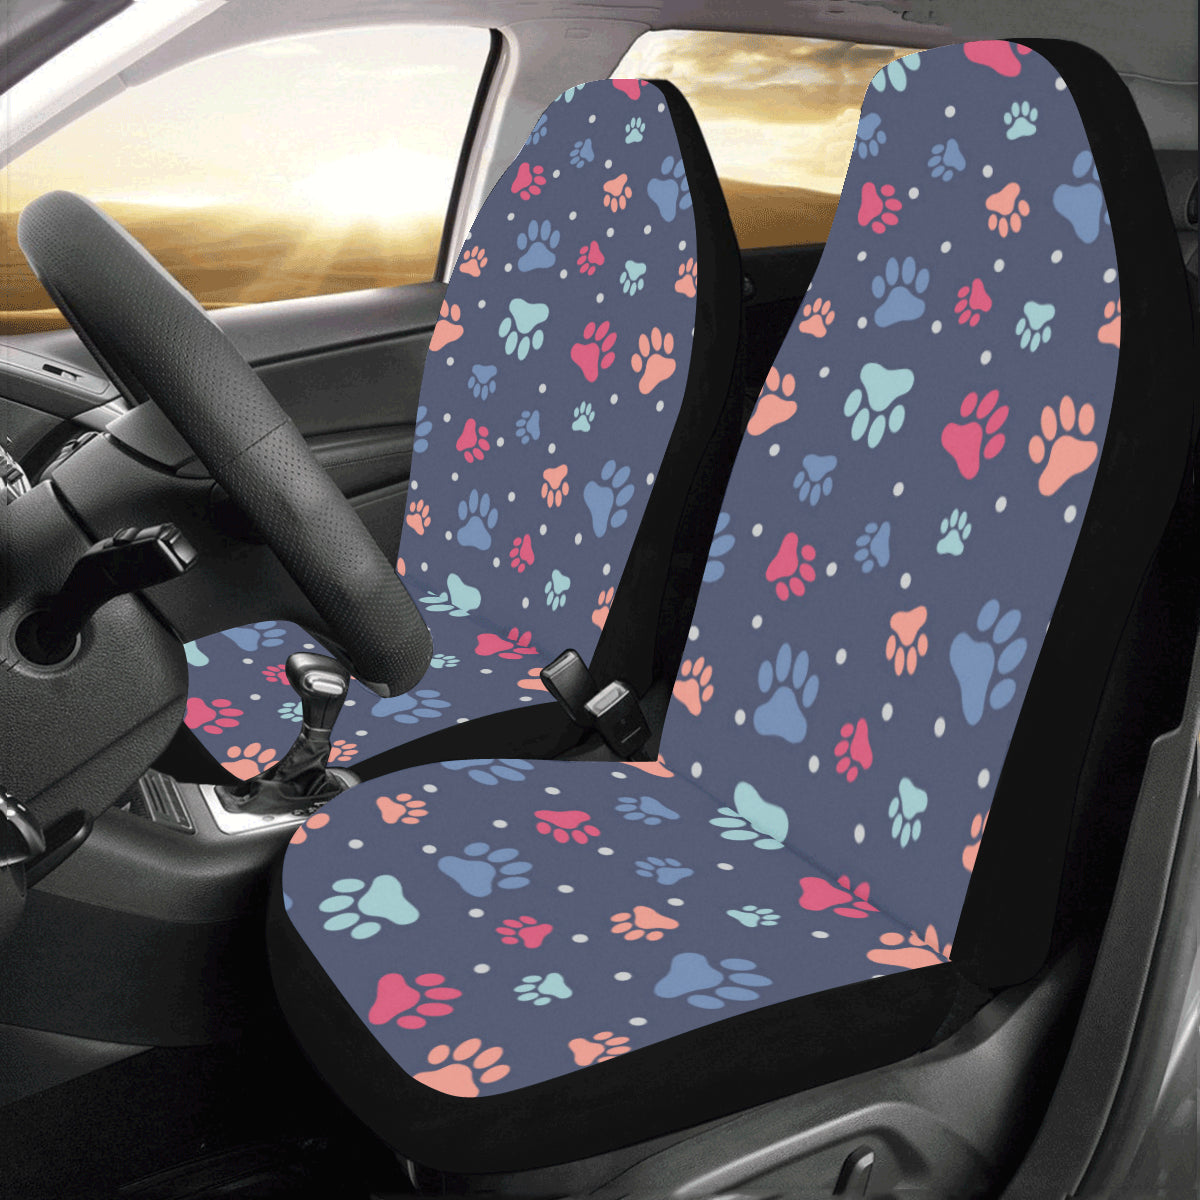 Dog Paws SUV Car Seat Covers for Vehicle 2 pc Set, Animal Print Blue Pattern Front Seat, Puppy Pet Gift Her Protector Accessory Decoration Starcove Fashion